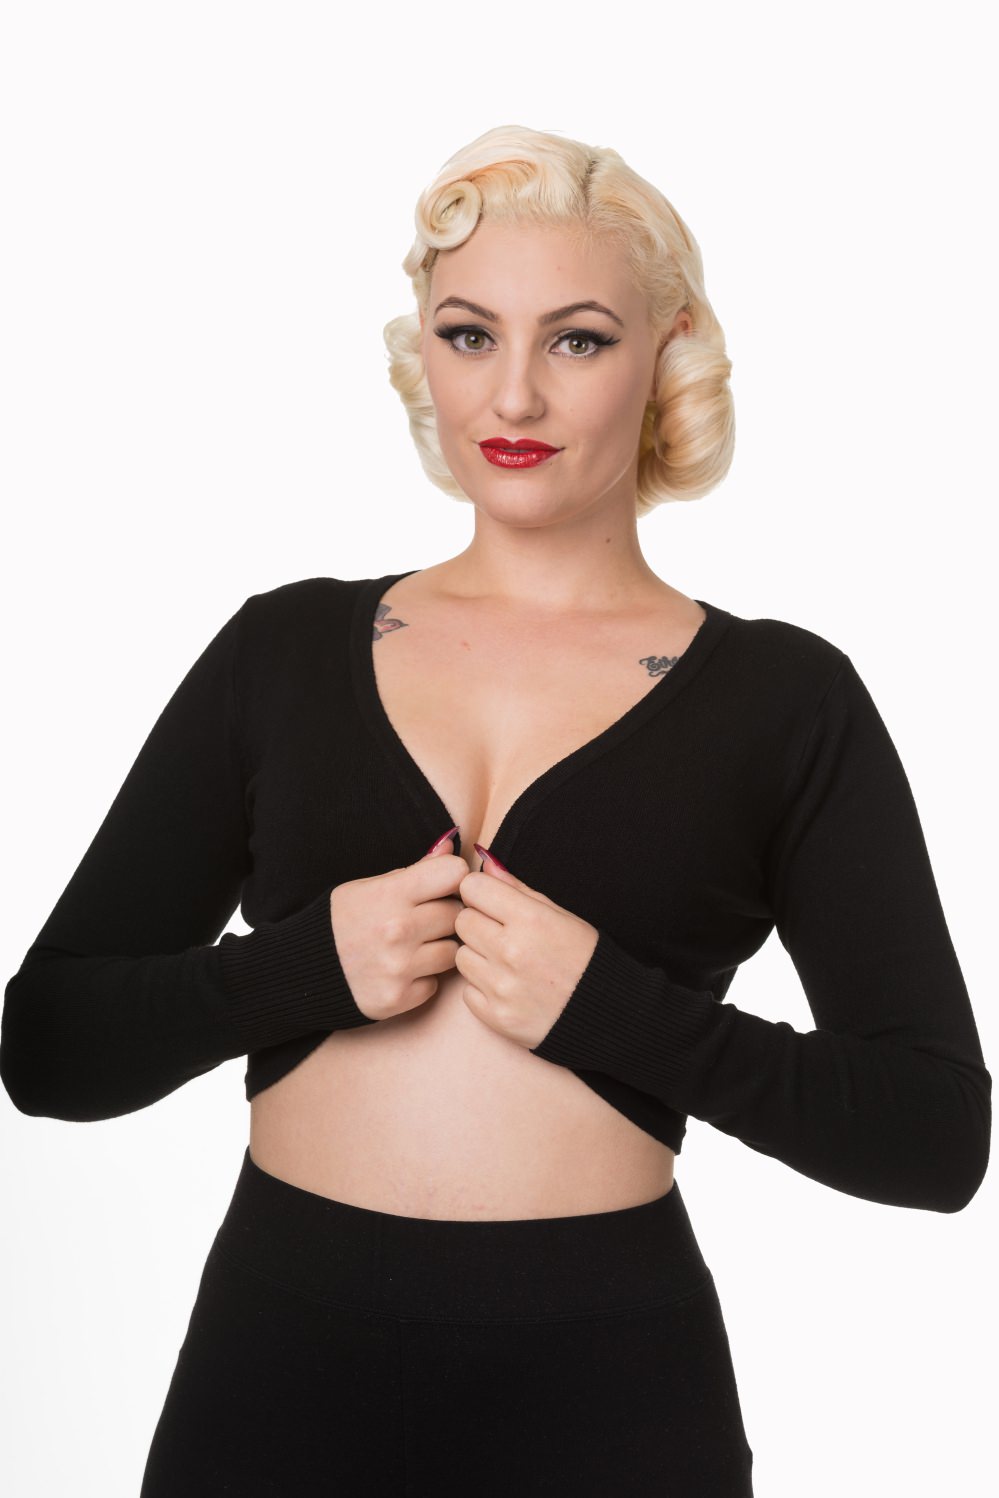 Vintage Inspired Panty Girdle In Plain Black – RetroEsque